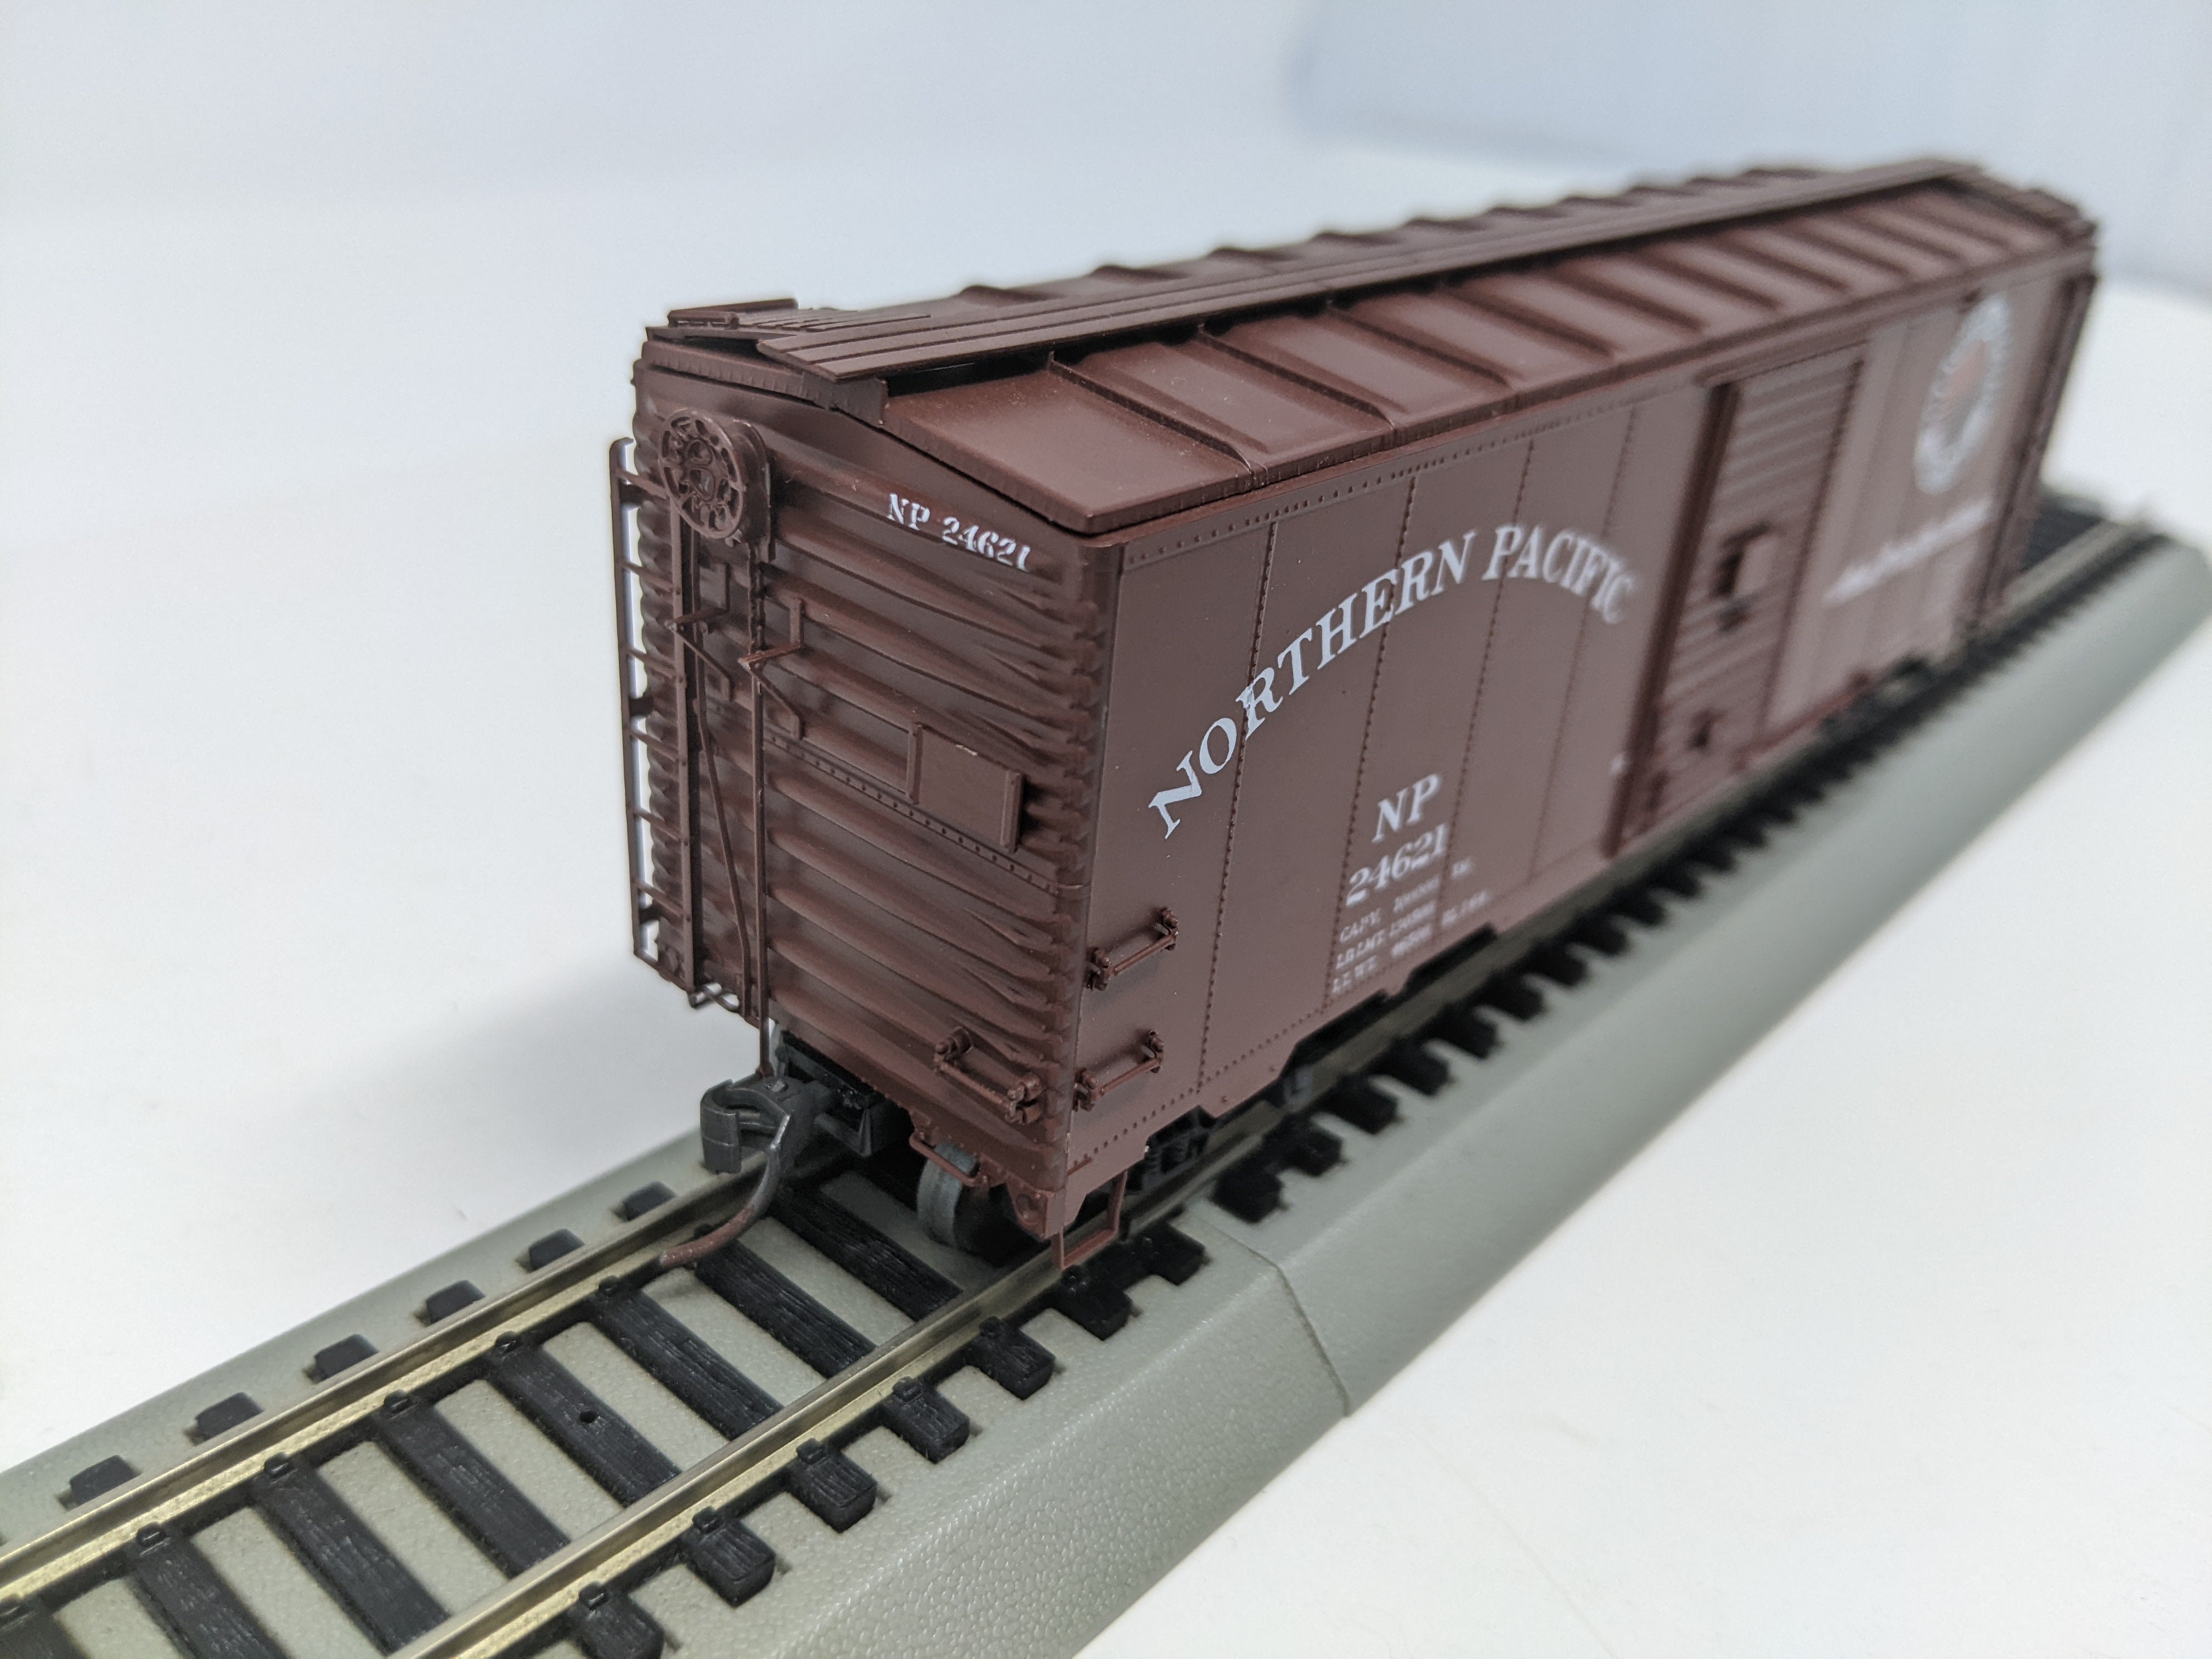 USED HO Scale, 40' Box Car, Nothern Pacific NP #24621, Read Description